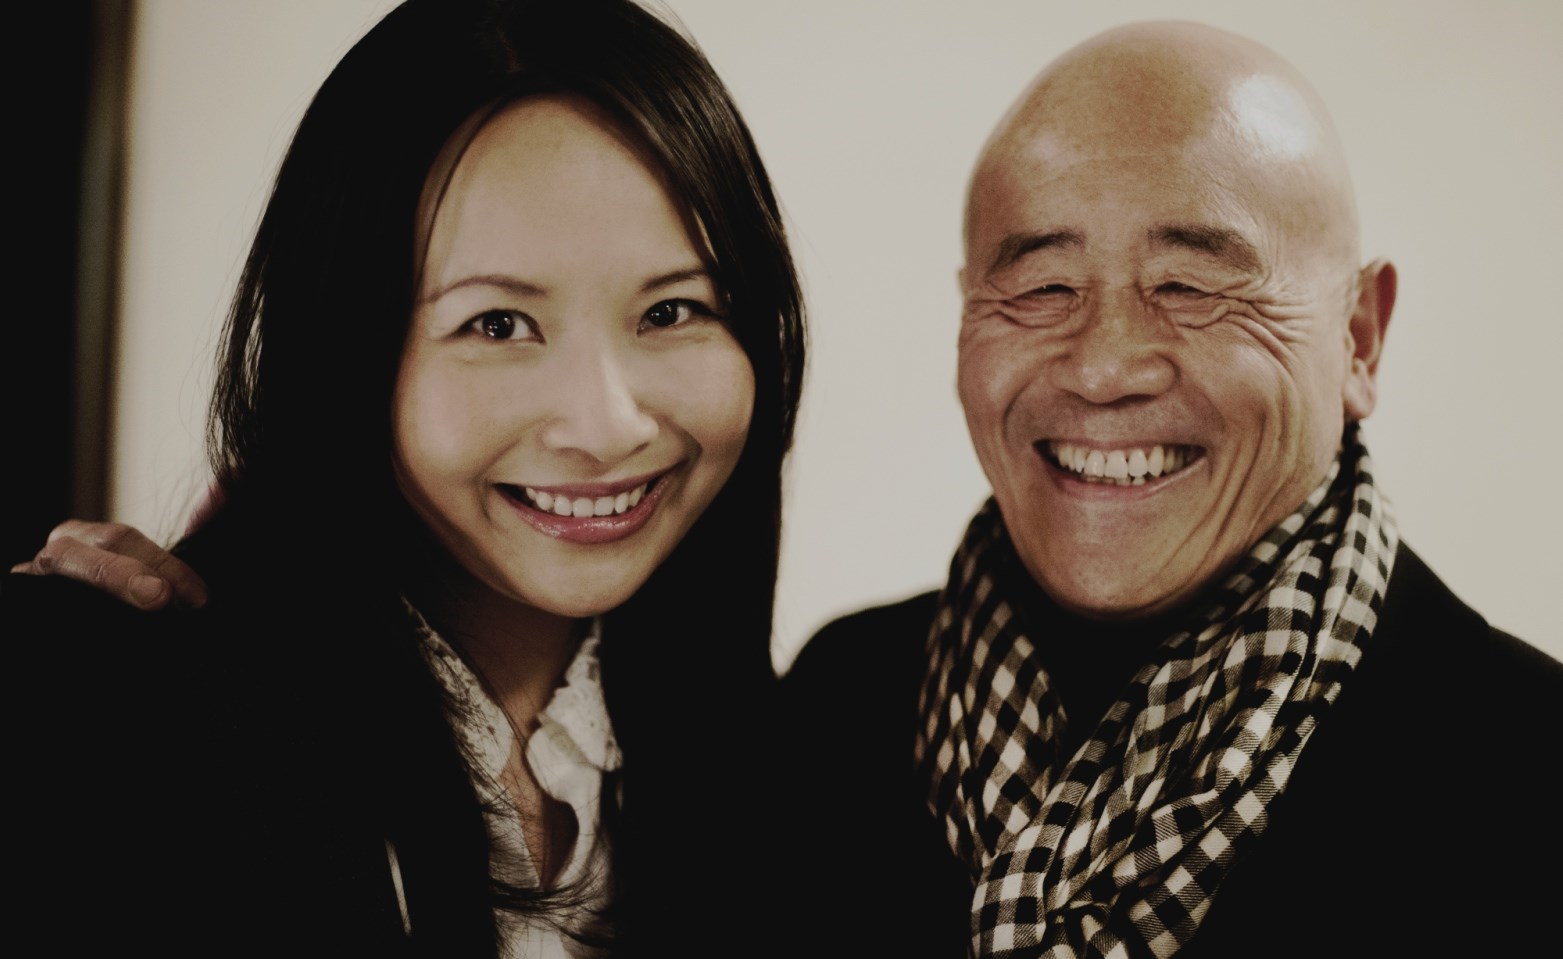 Ching-He Huang and Ken Hom (winners of the Food Broadcast of the Year Award)